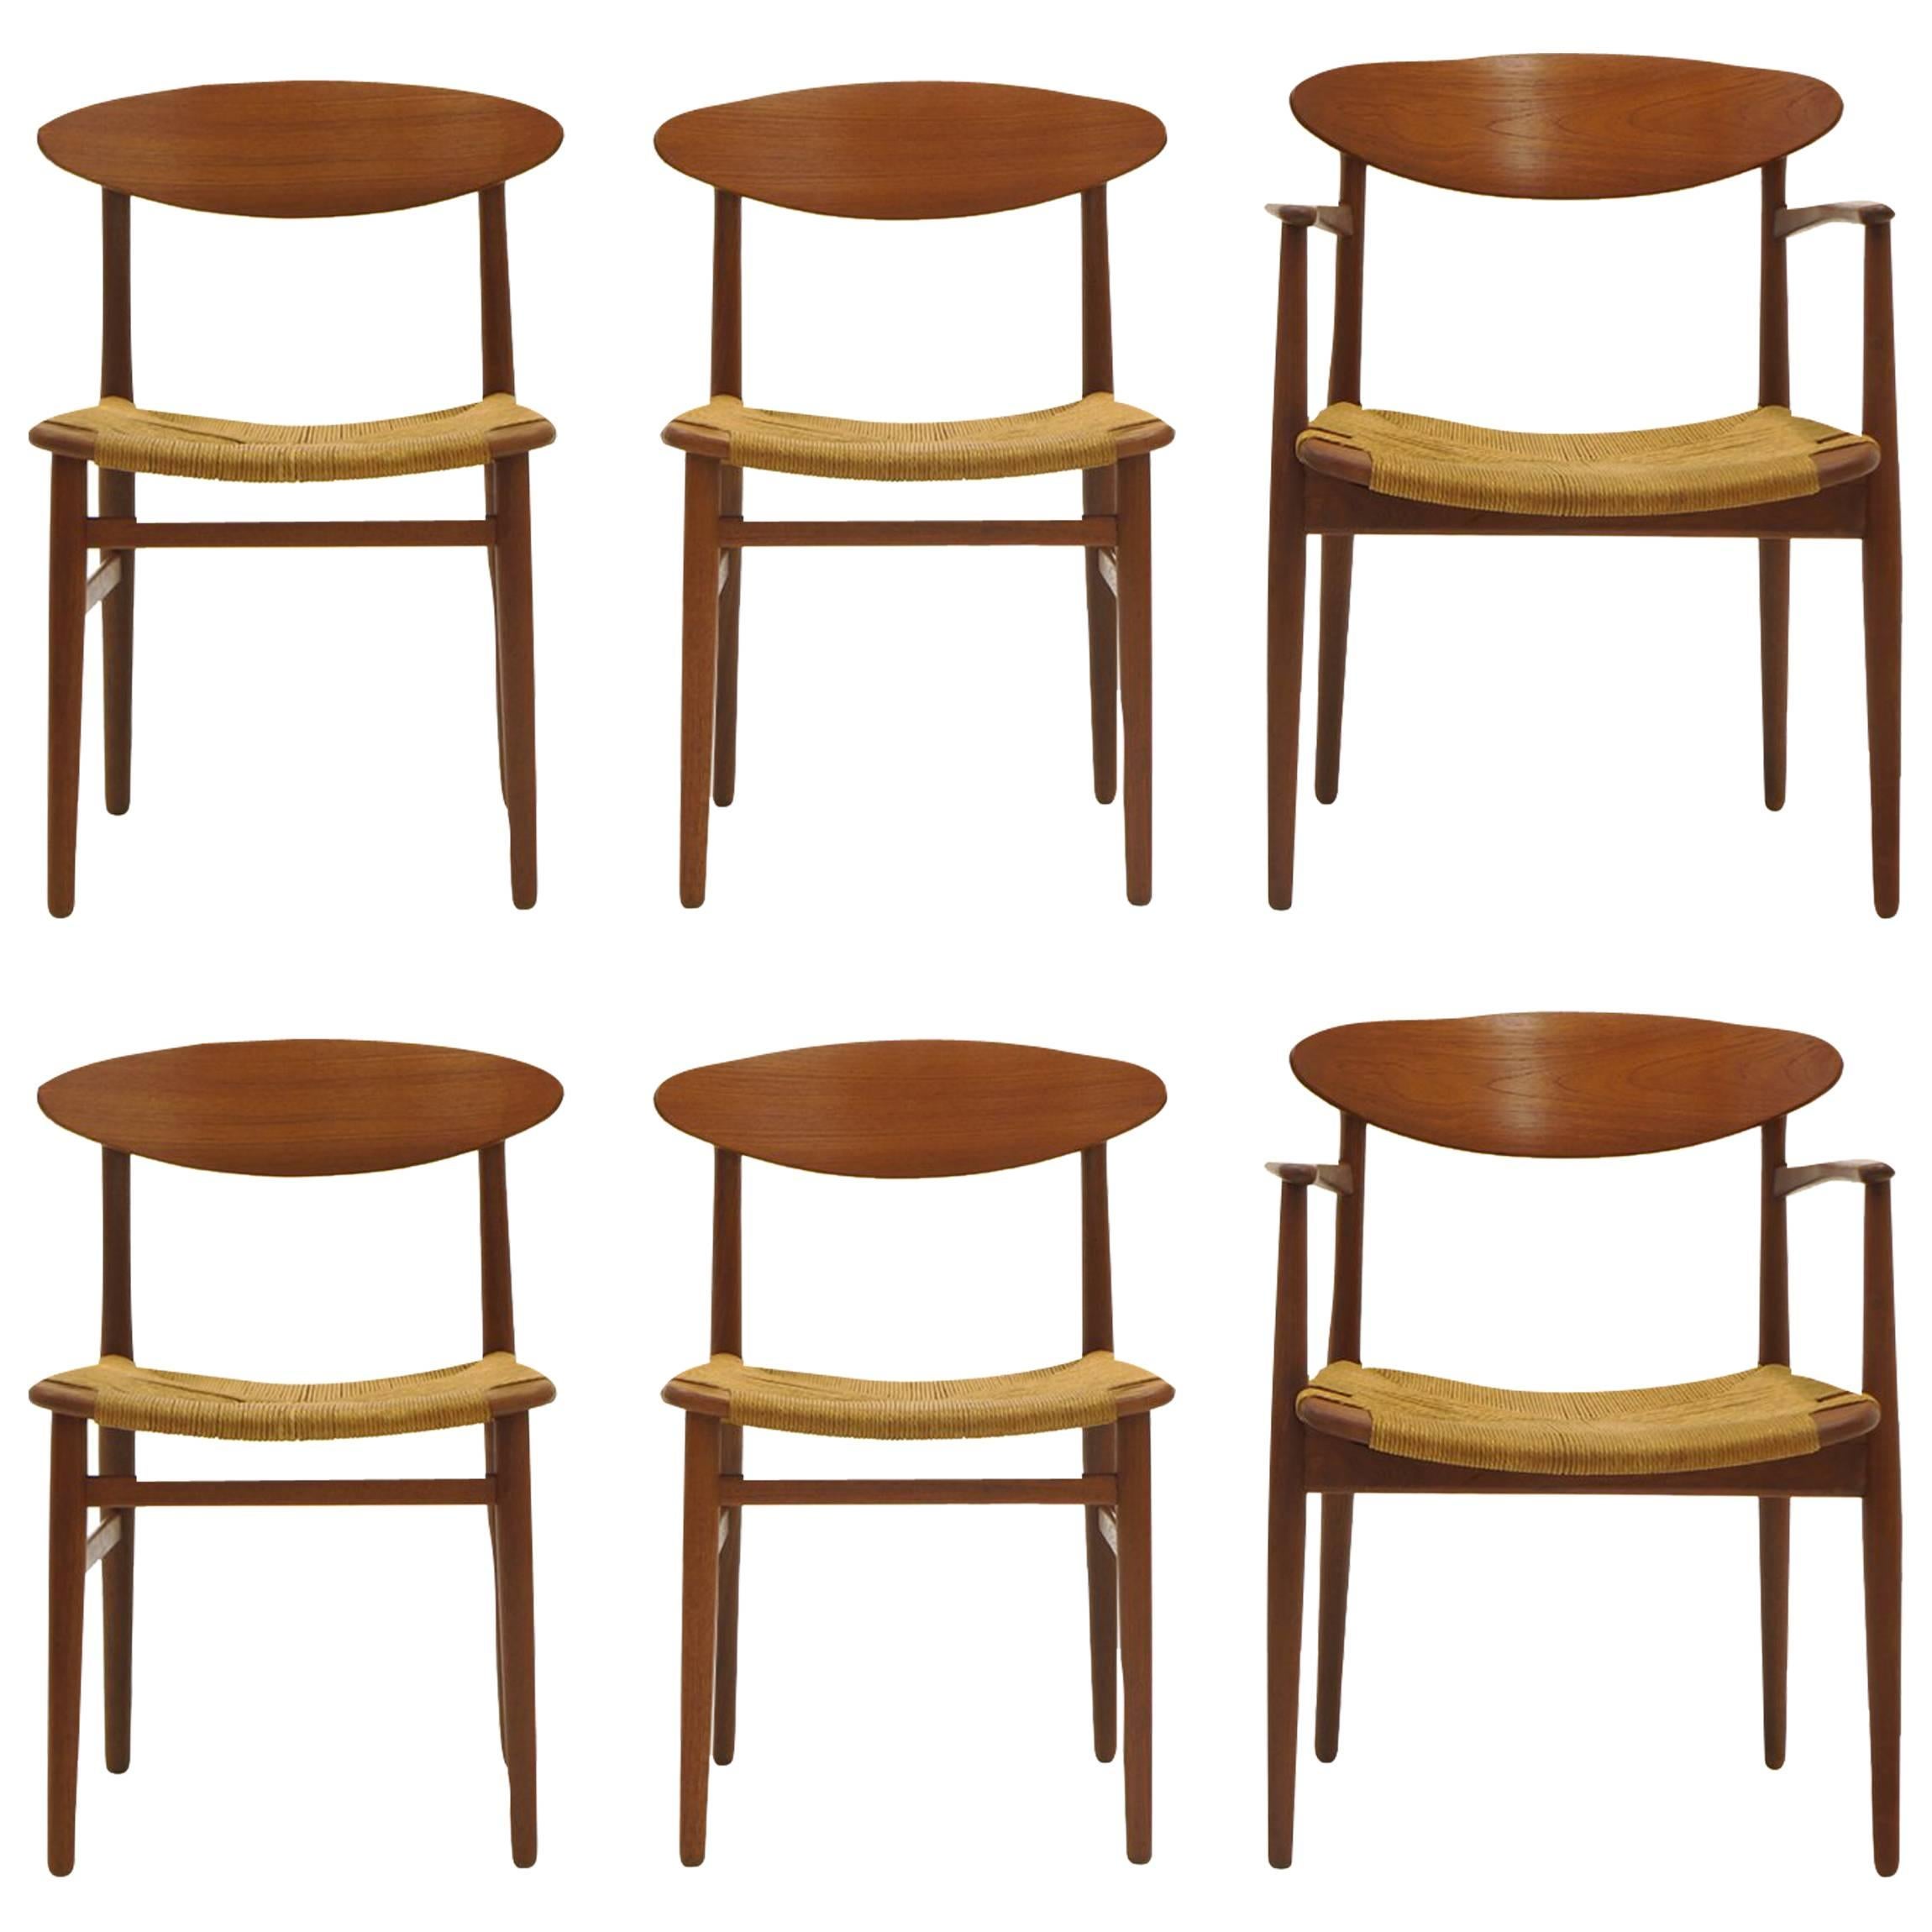 Set of Six Danish Modern Teak Dining Chairs by Ejner Larsen and Aksel Madsen For Sale